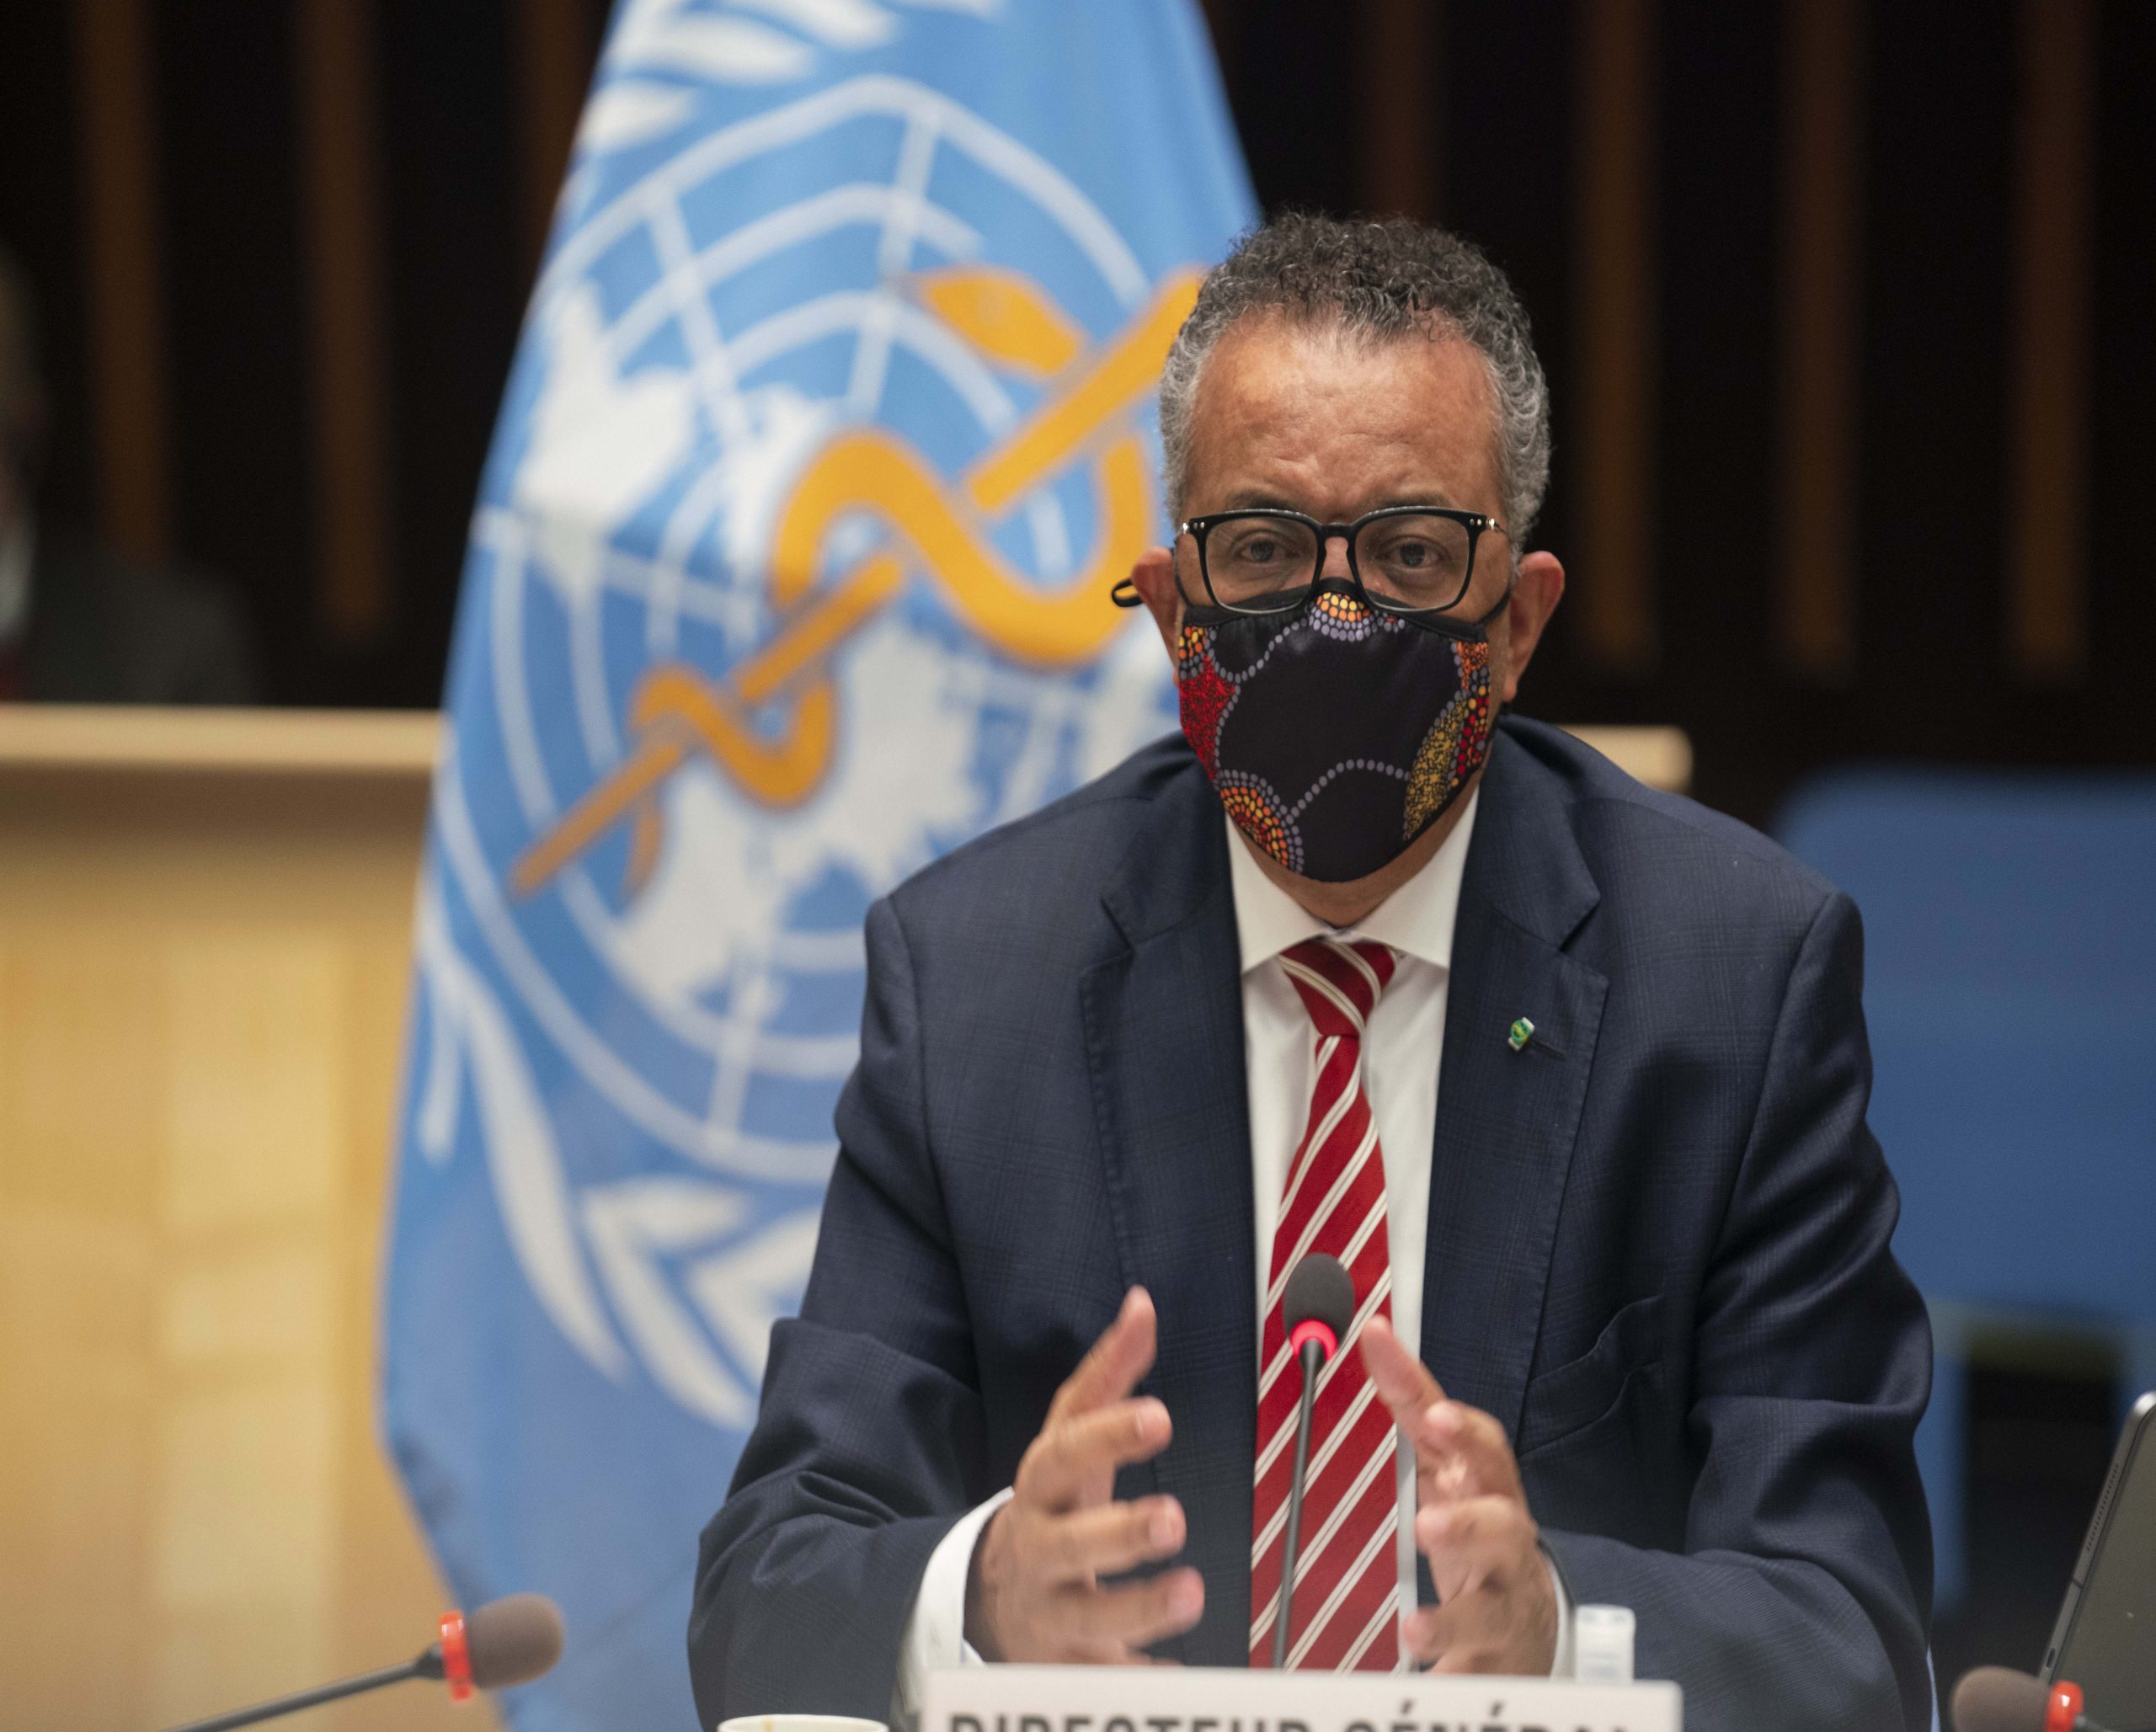 COVID-19 pandemic will not be the last: WHO chief